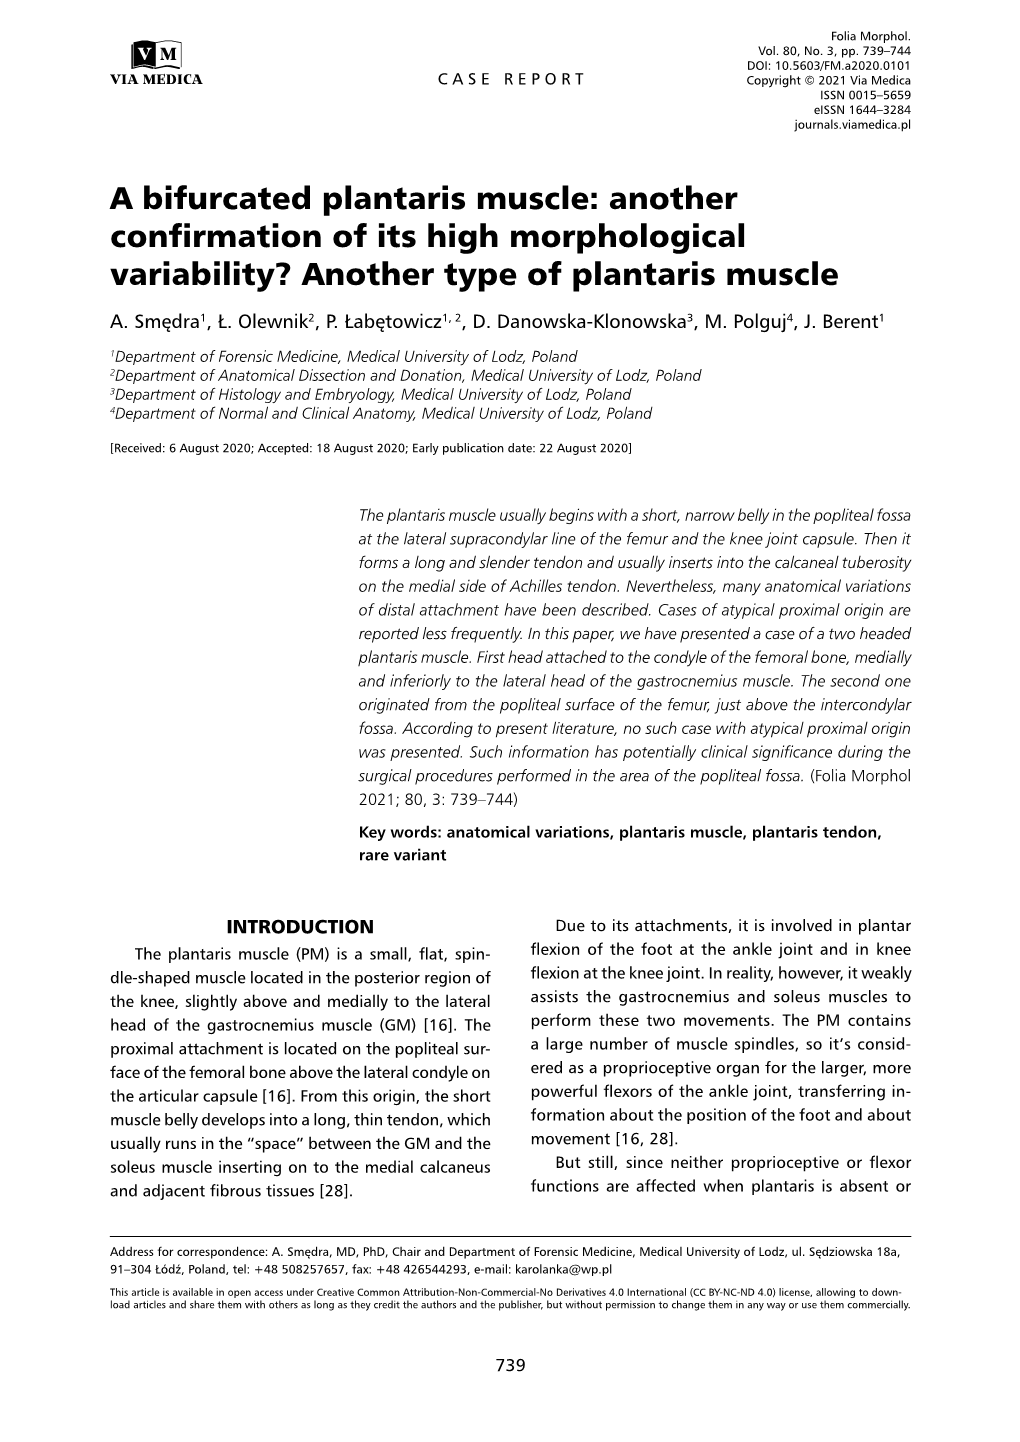 A Bifurcated Plantaris Muscle: Another Confirmation of Its High Morphological Variability? Another Type of Plantaris Muscle A